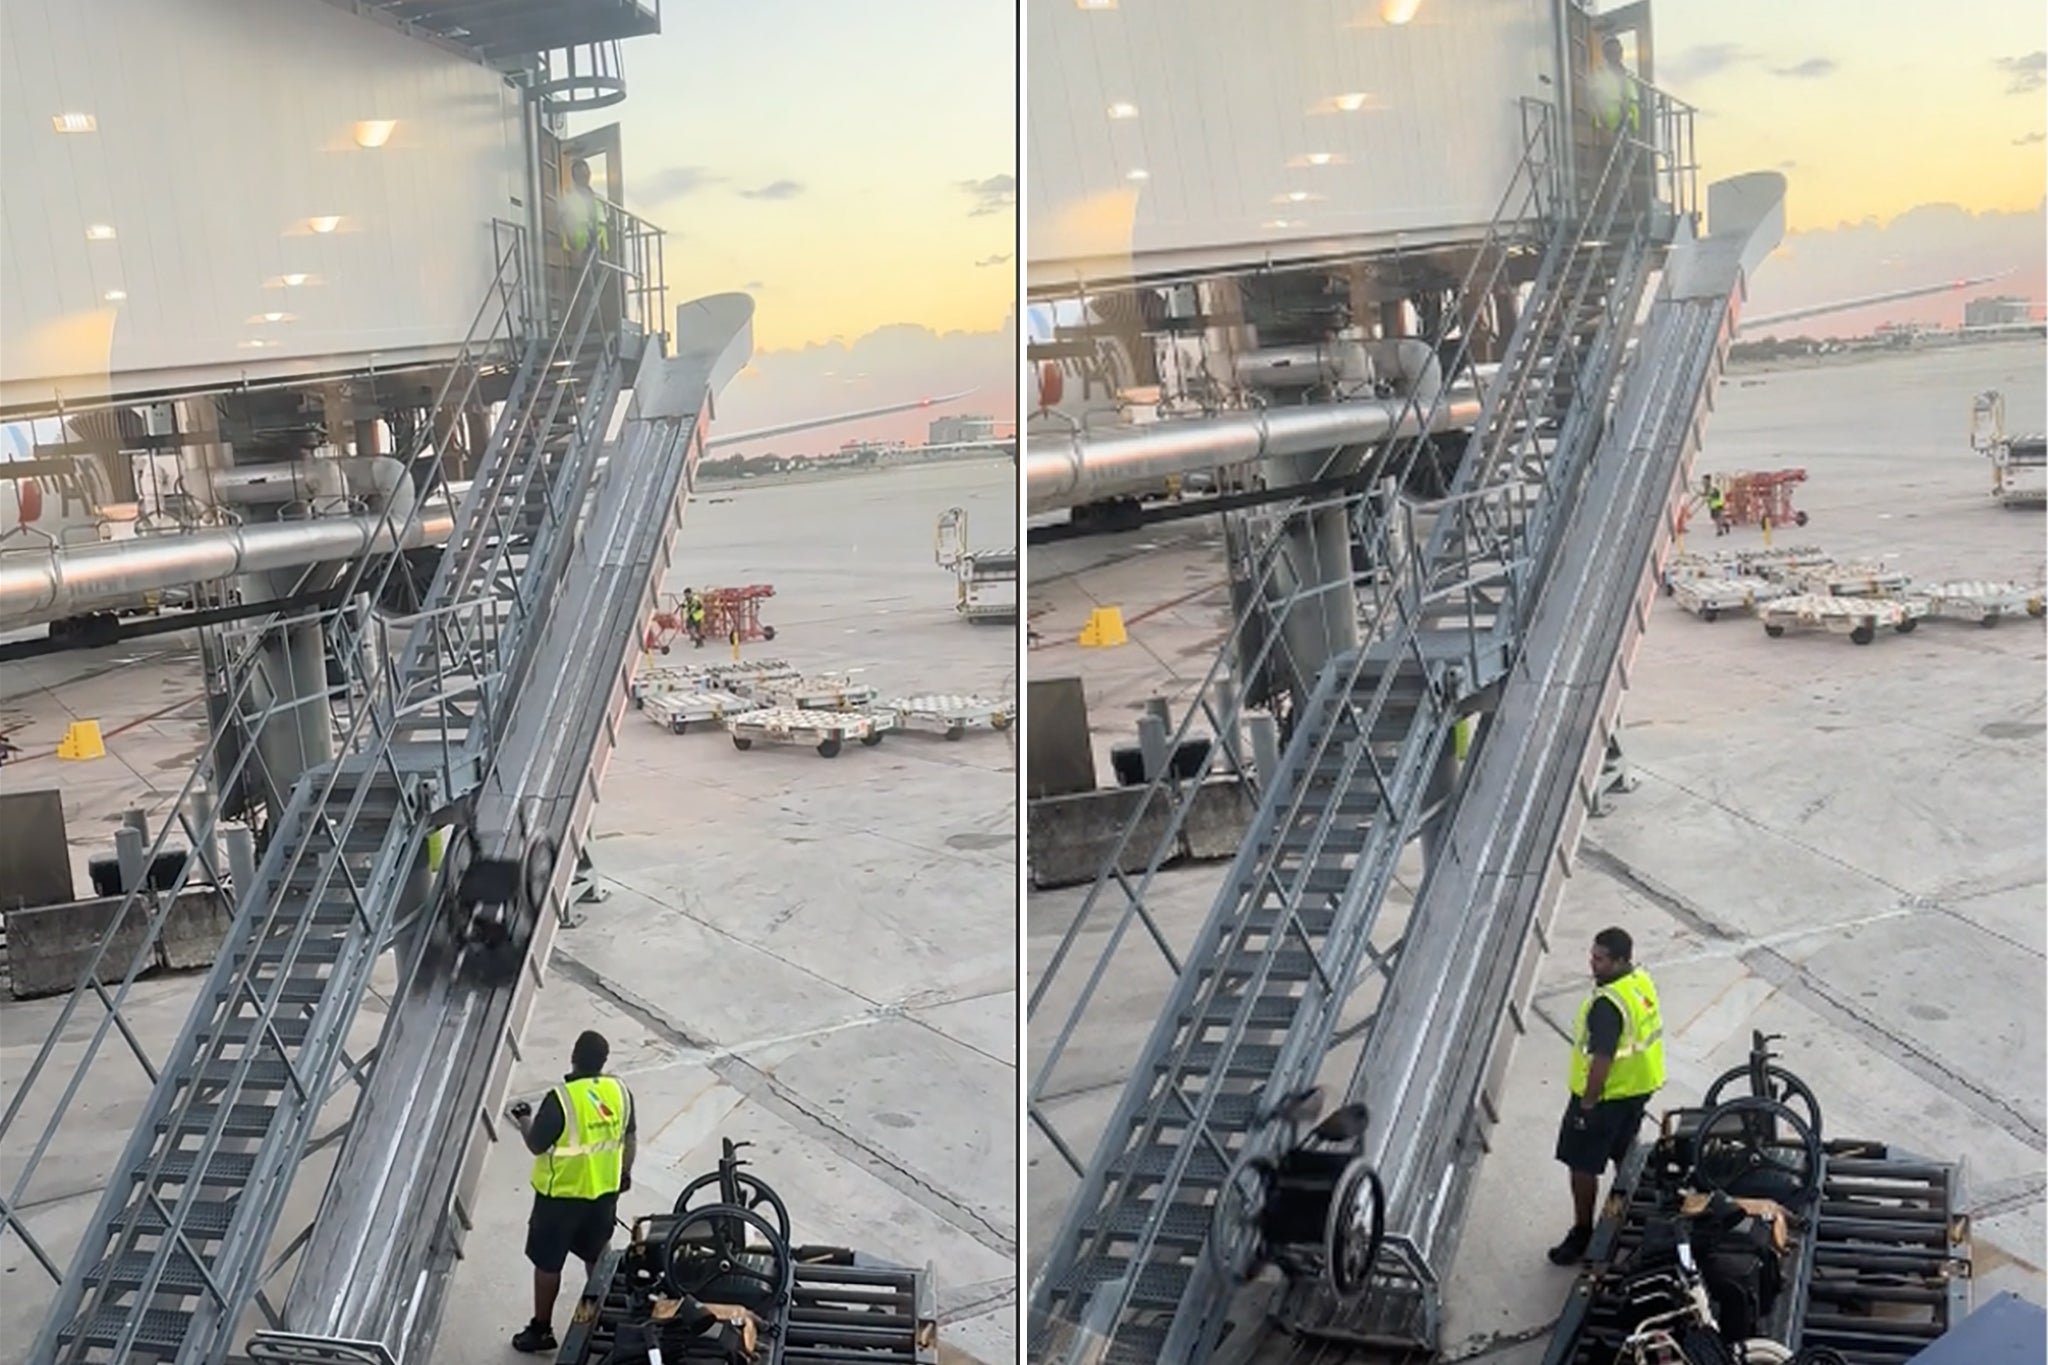 A passenger saw the wheelcair being dropped down a chute at an airport in the United States